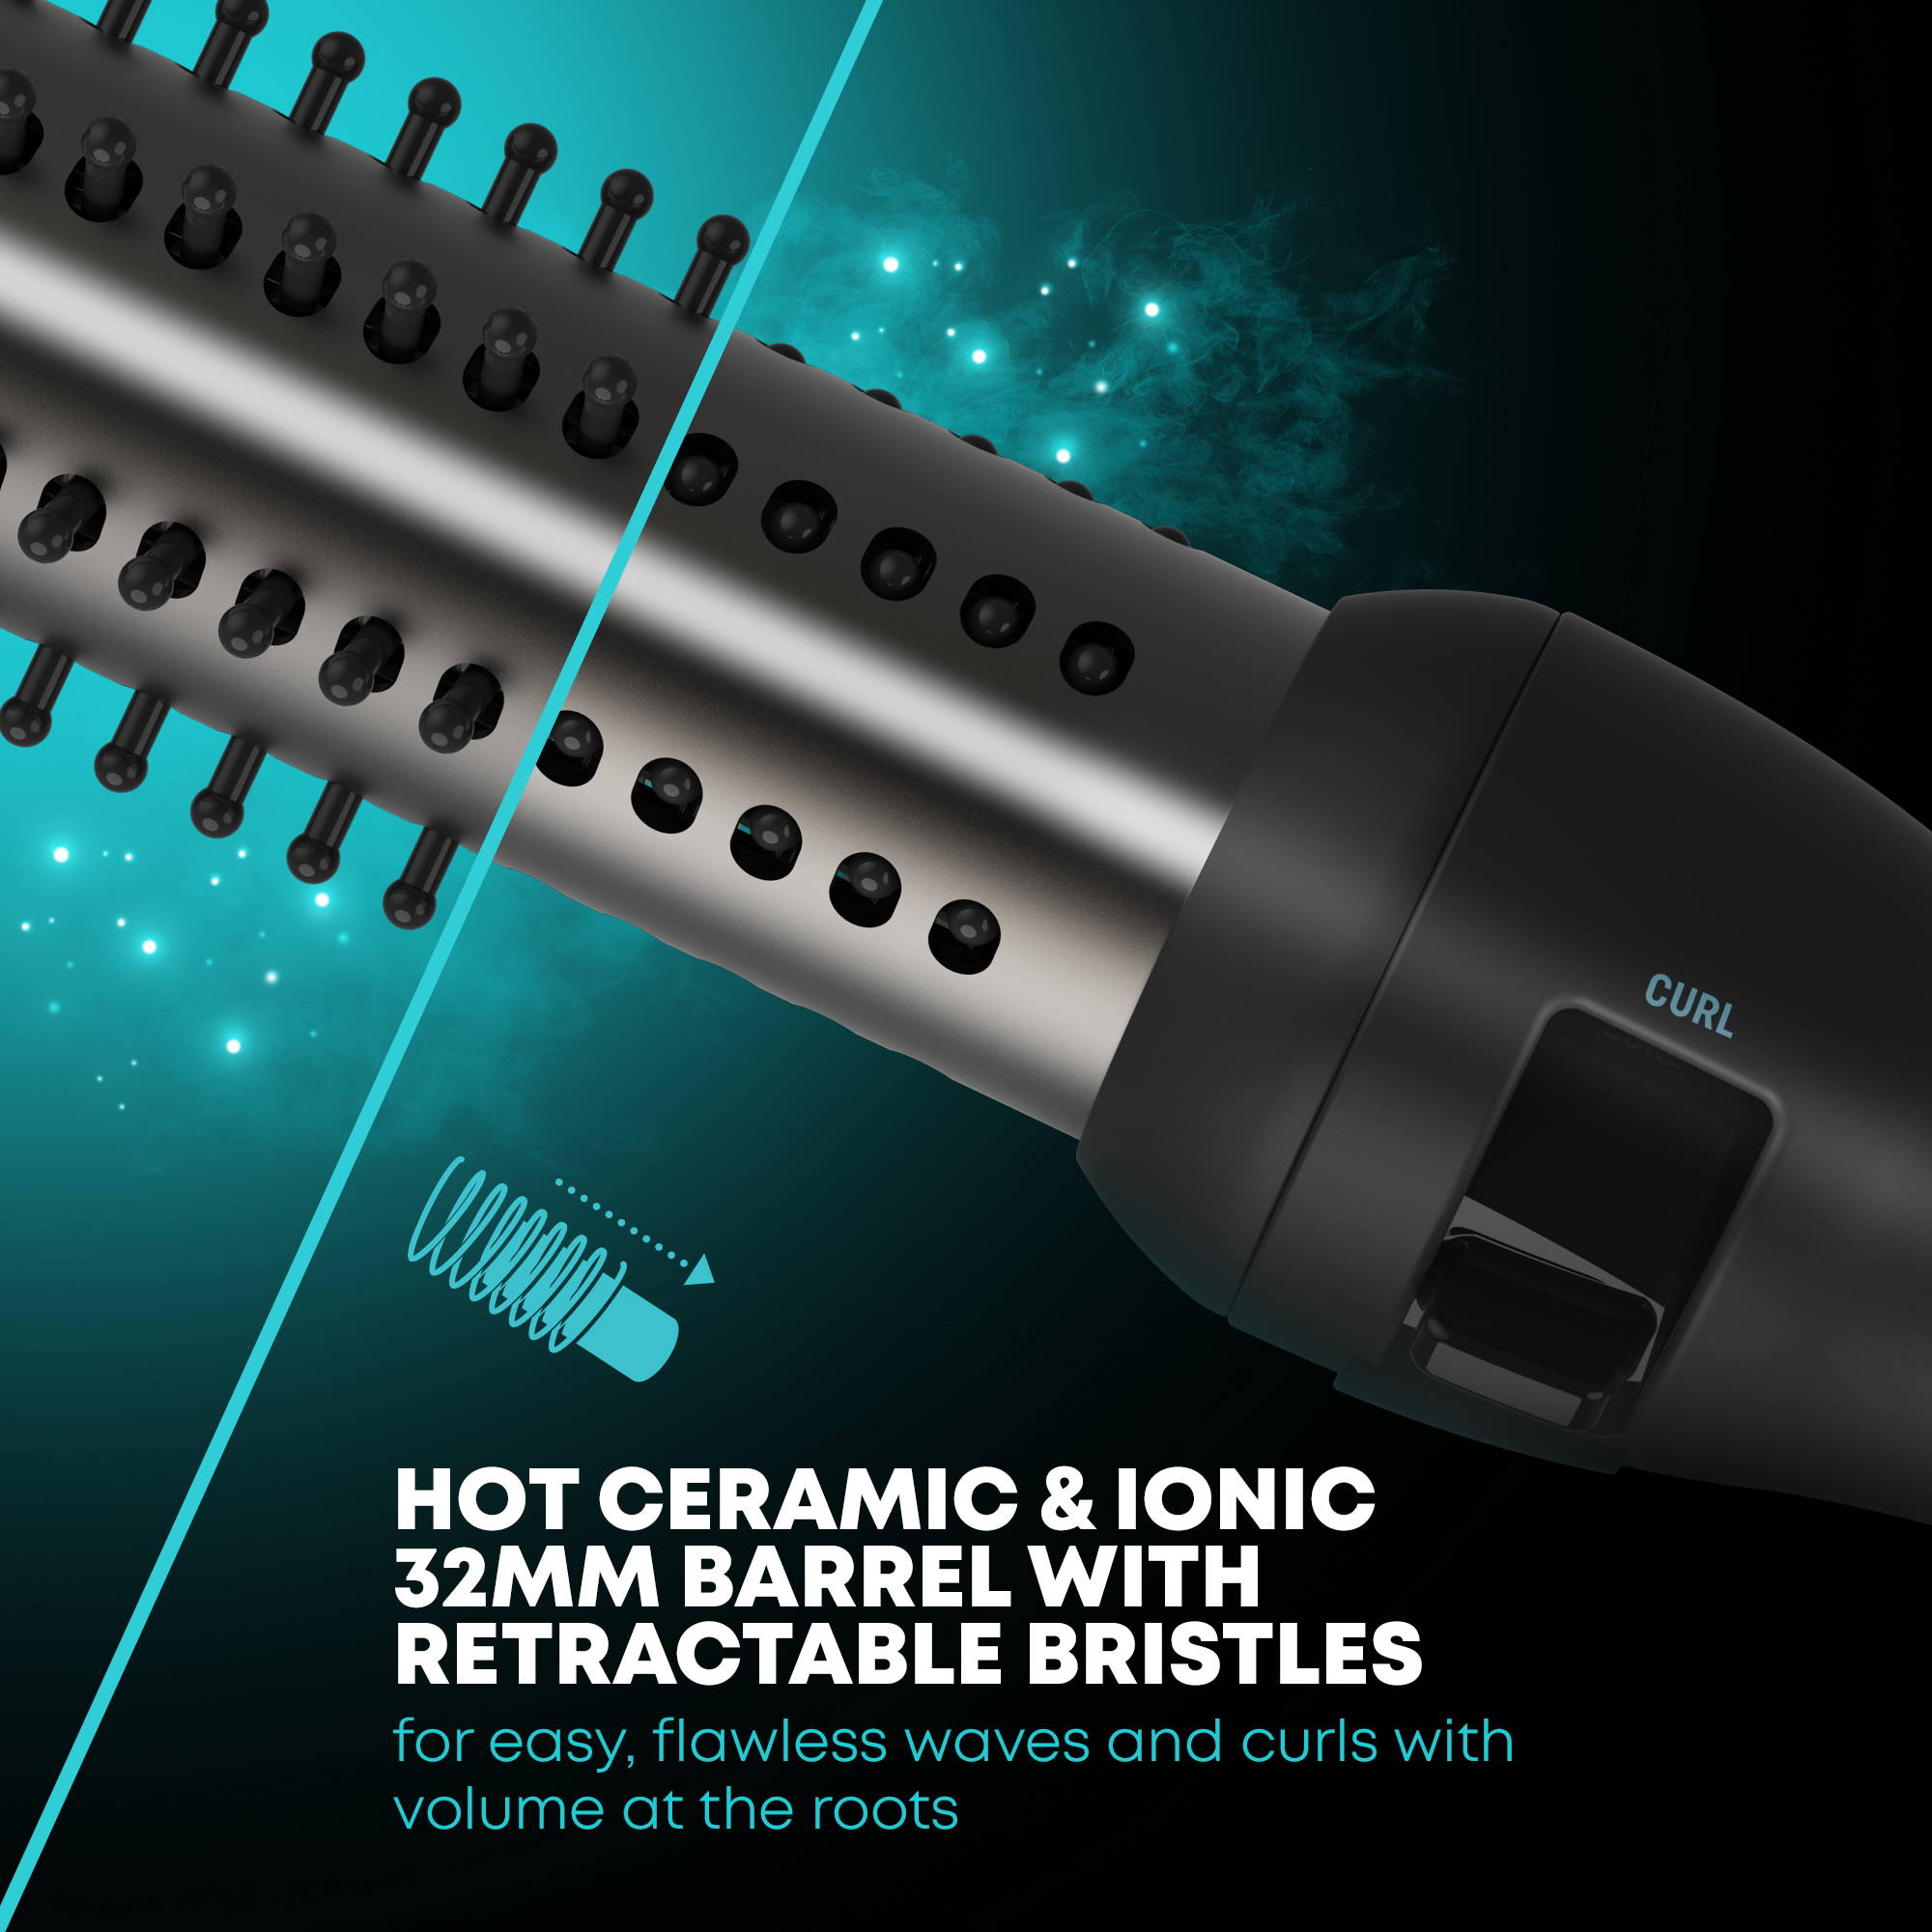 Retractable Bristles for Quick and Easy Styling